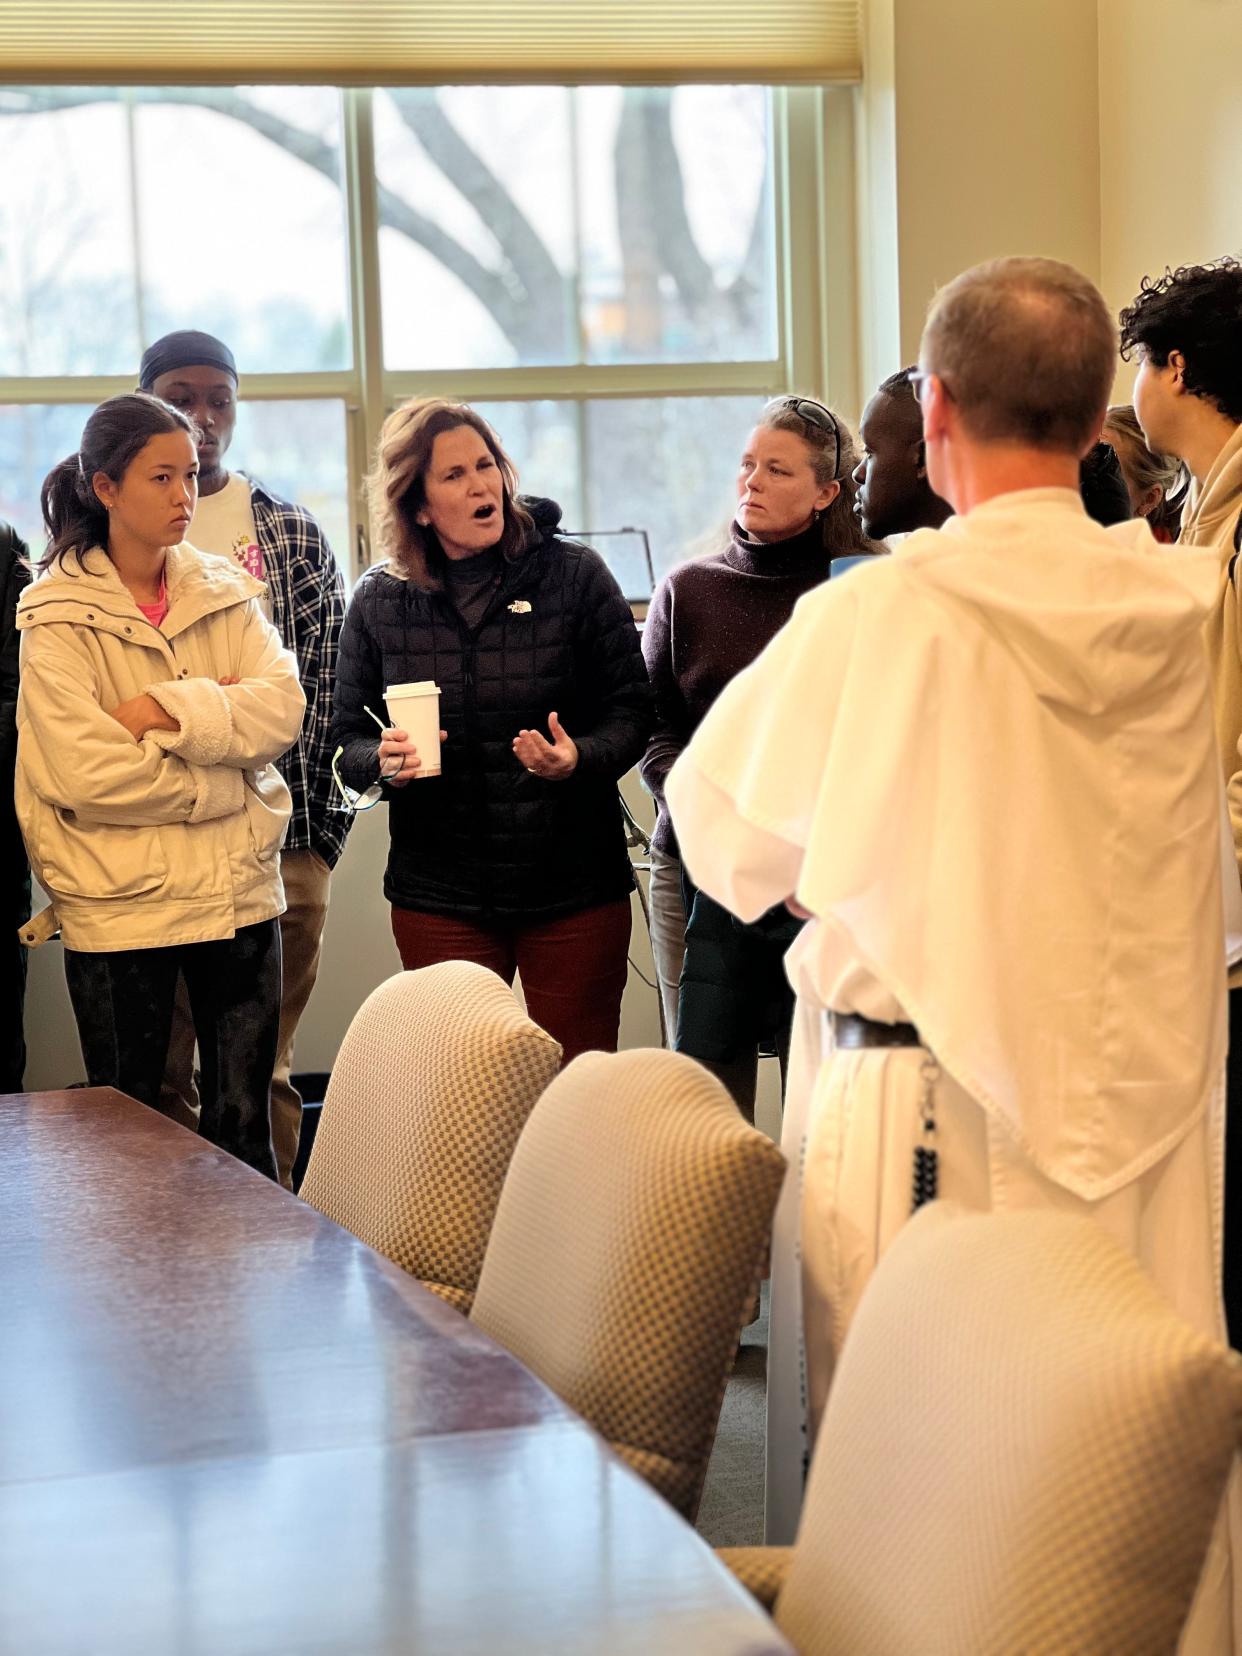 Alison Caplan, an associate professor of world languages, addresses Providence College's president, the Rev. Kenneth Sicard, as part of a group that delivered letters seeking greater acceptance of the LGBTQ+ community on campus.